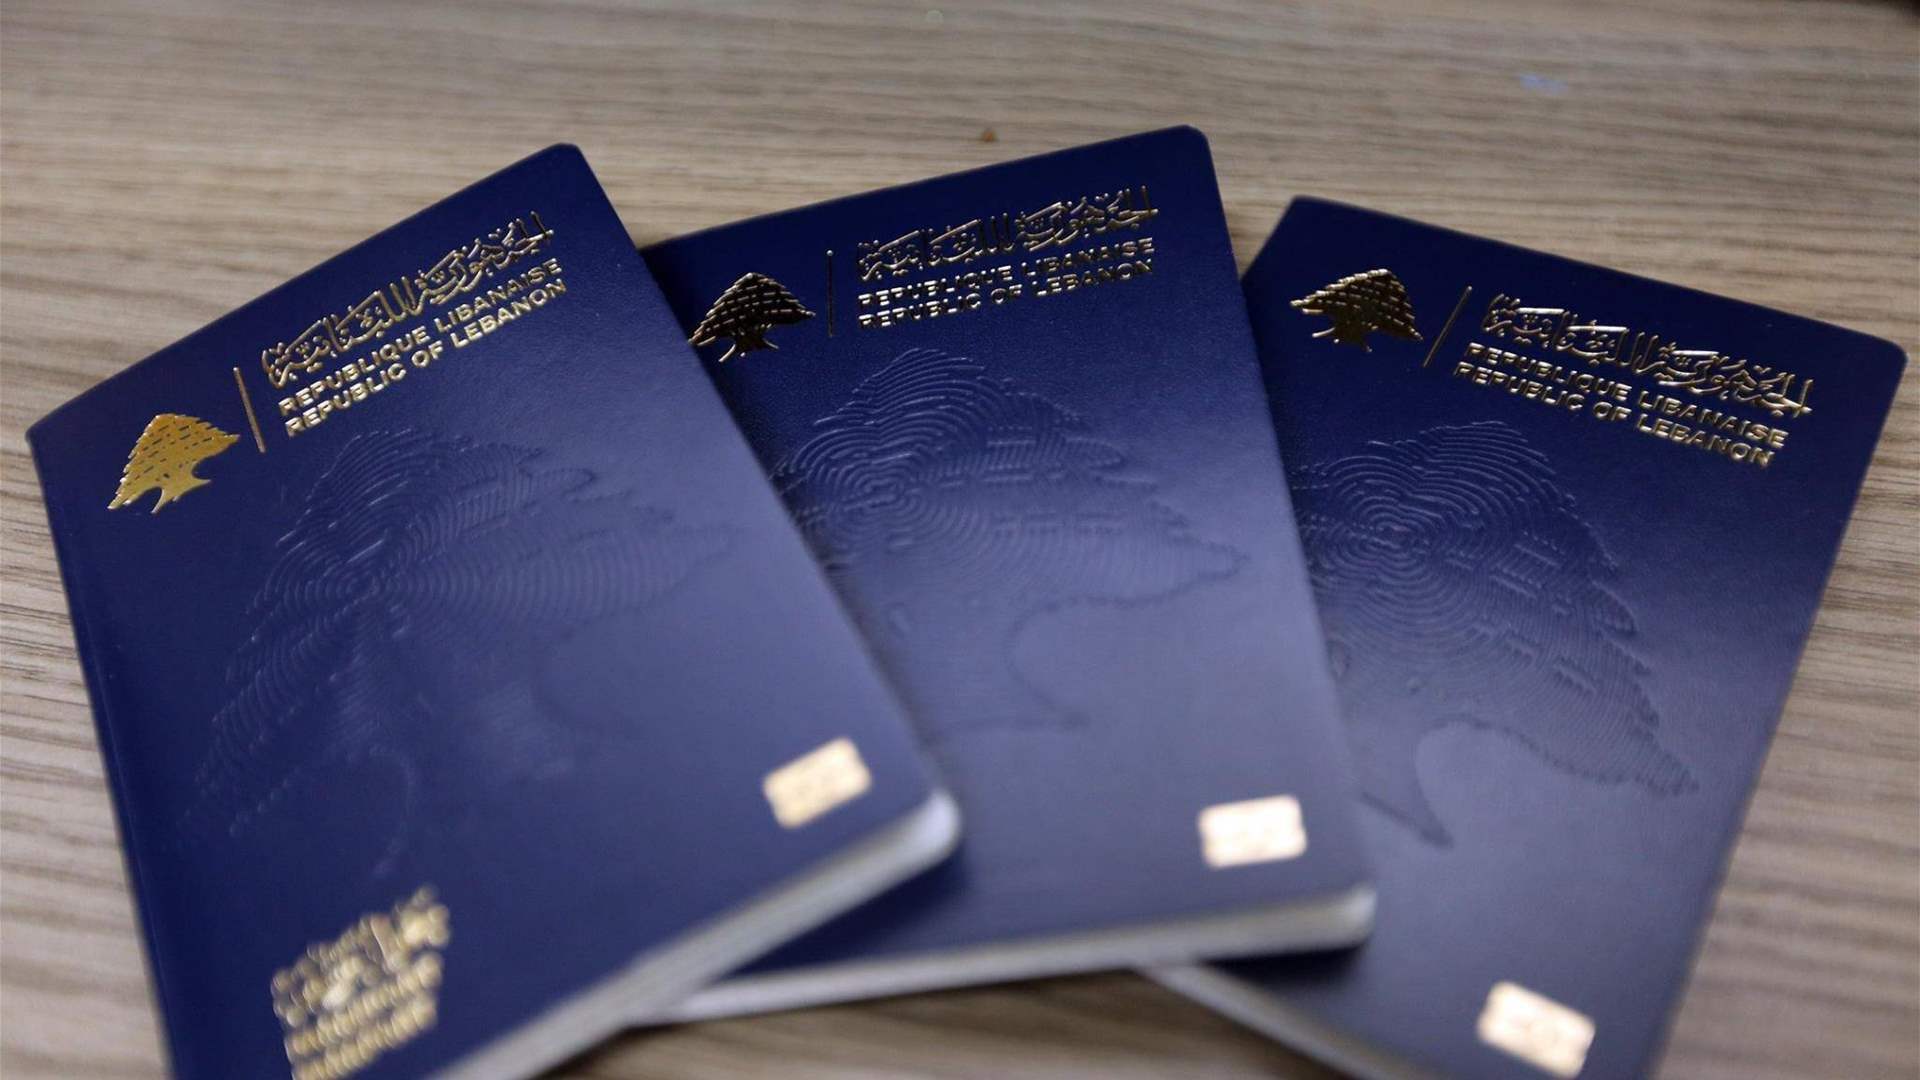 General Security confirms that it has enough passports to meet all requests